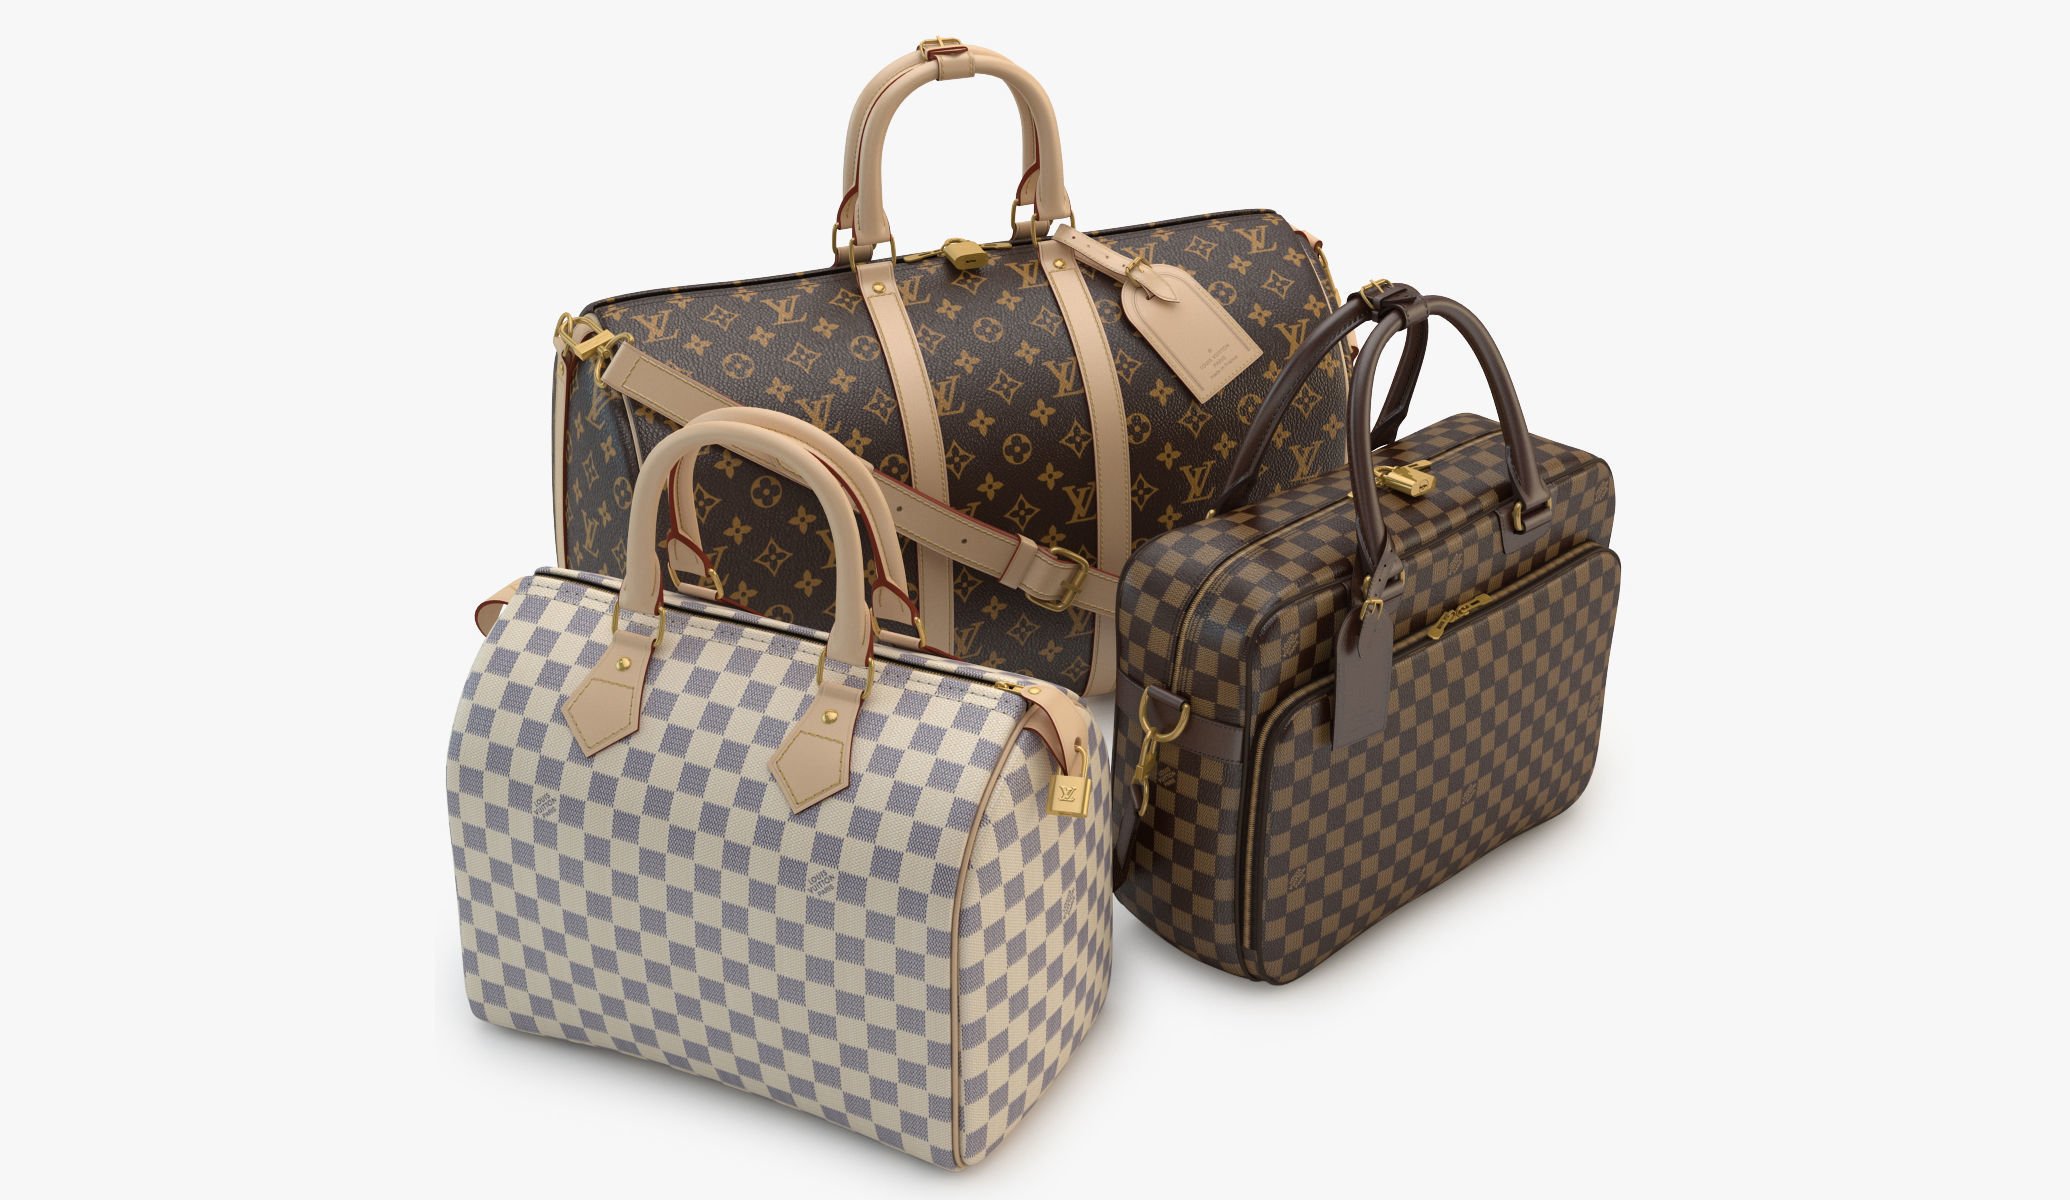 Louis collection. Сумка Луи Виттон 3d. Louis Vuitton, Louis Vuitton Handbags. Louis Vuitton Carryall. Louis Vuitton 1a7wi4.